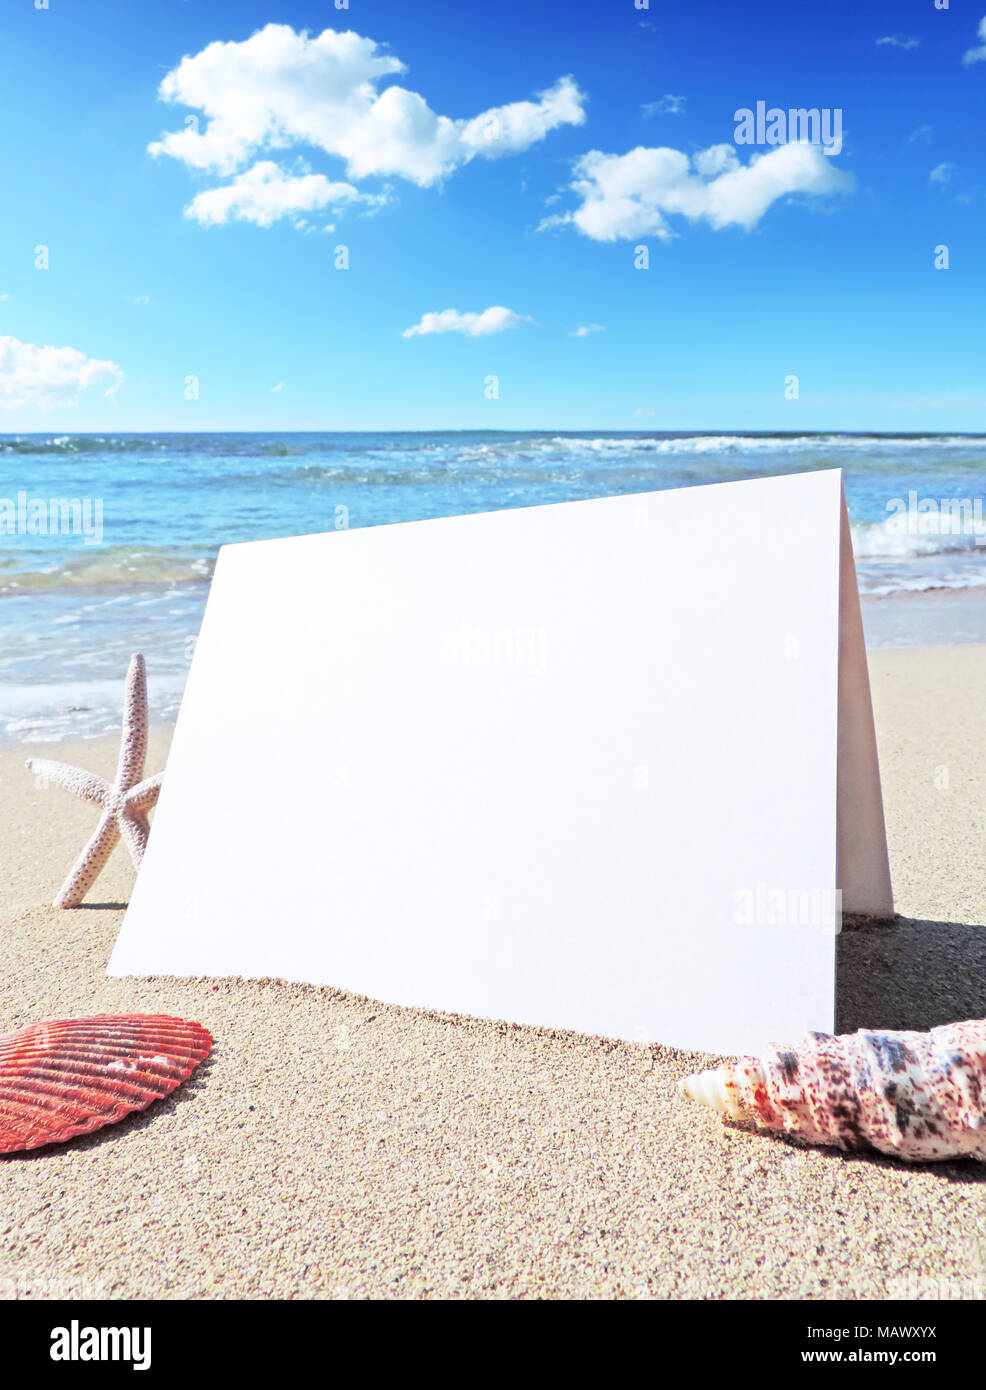 Blank white card or greeting card on the beach with copy space.  Summer holiday or beach vacation scene with shells and starfish. Holiday greetings. Stock Photo